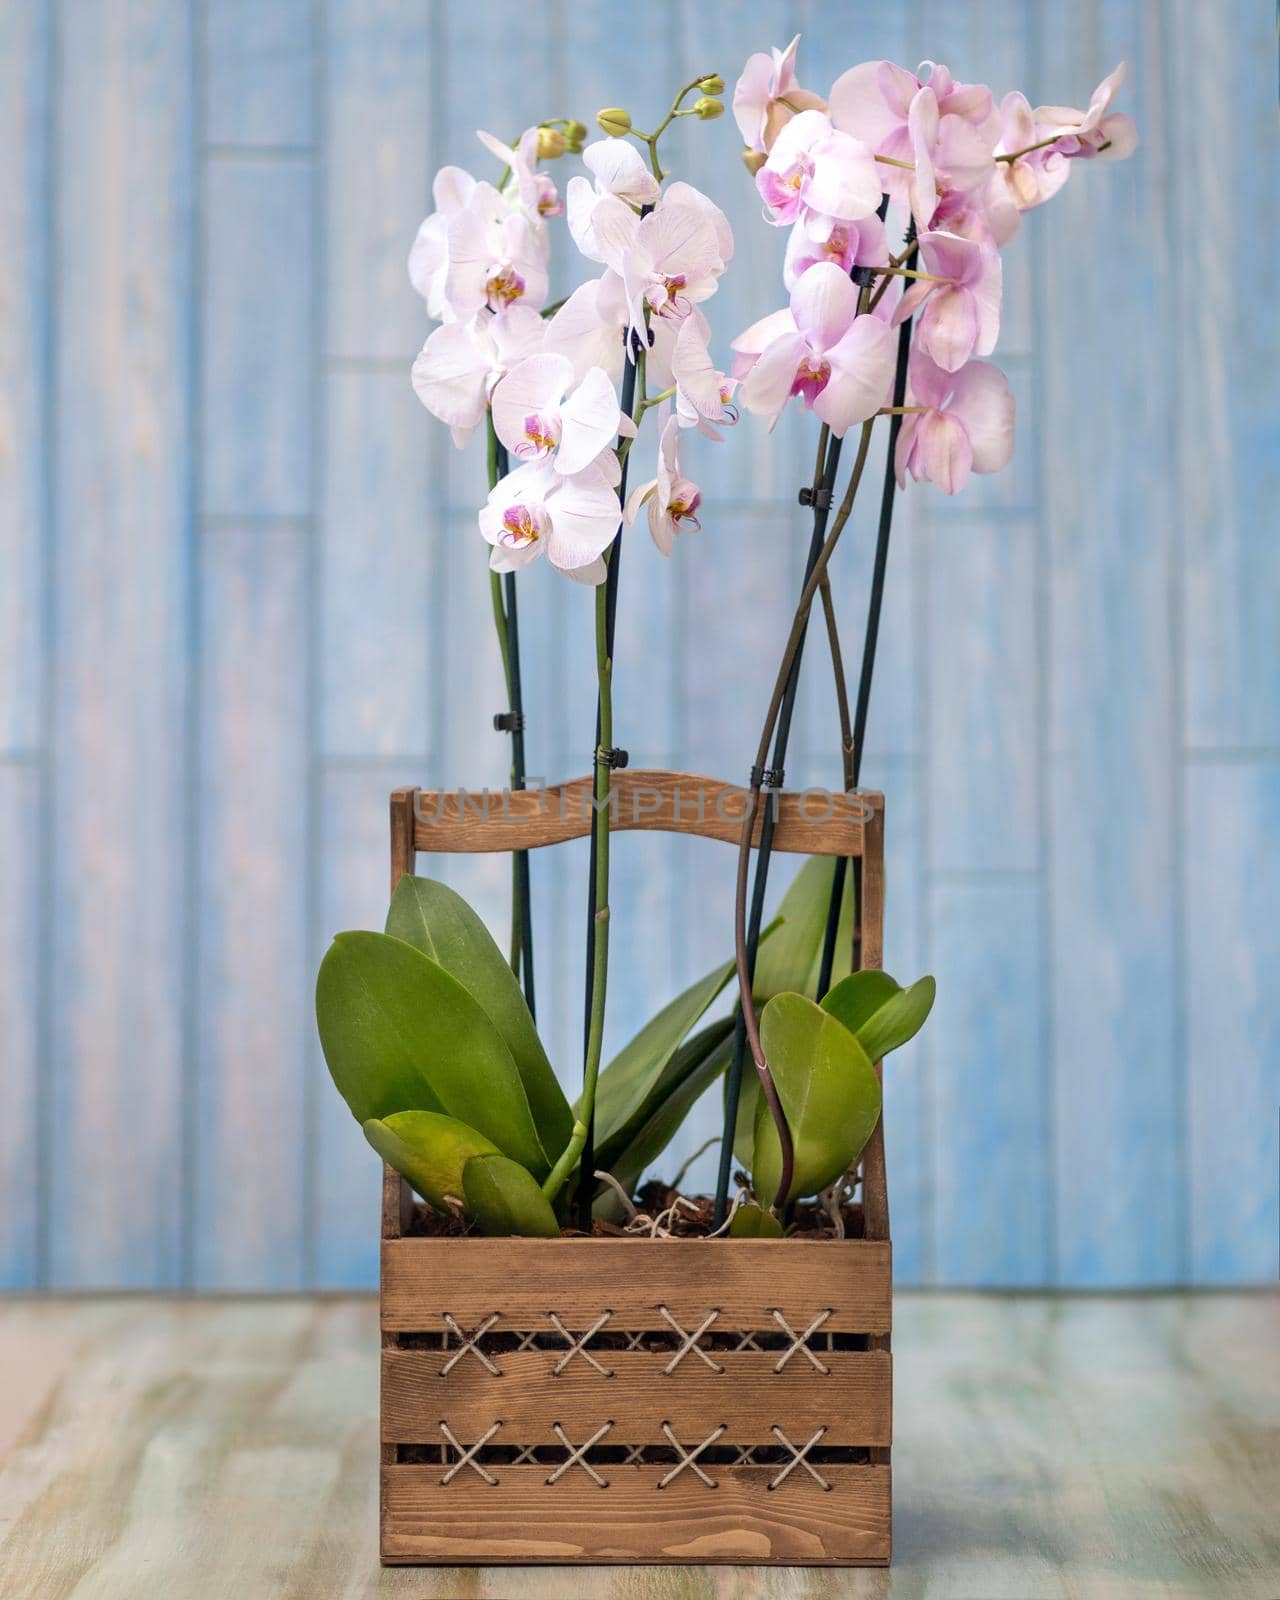 Phalaenopsist moth orchid in the wooden box